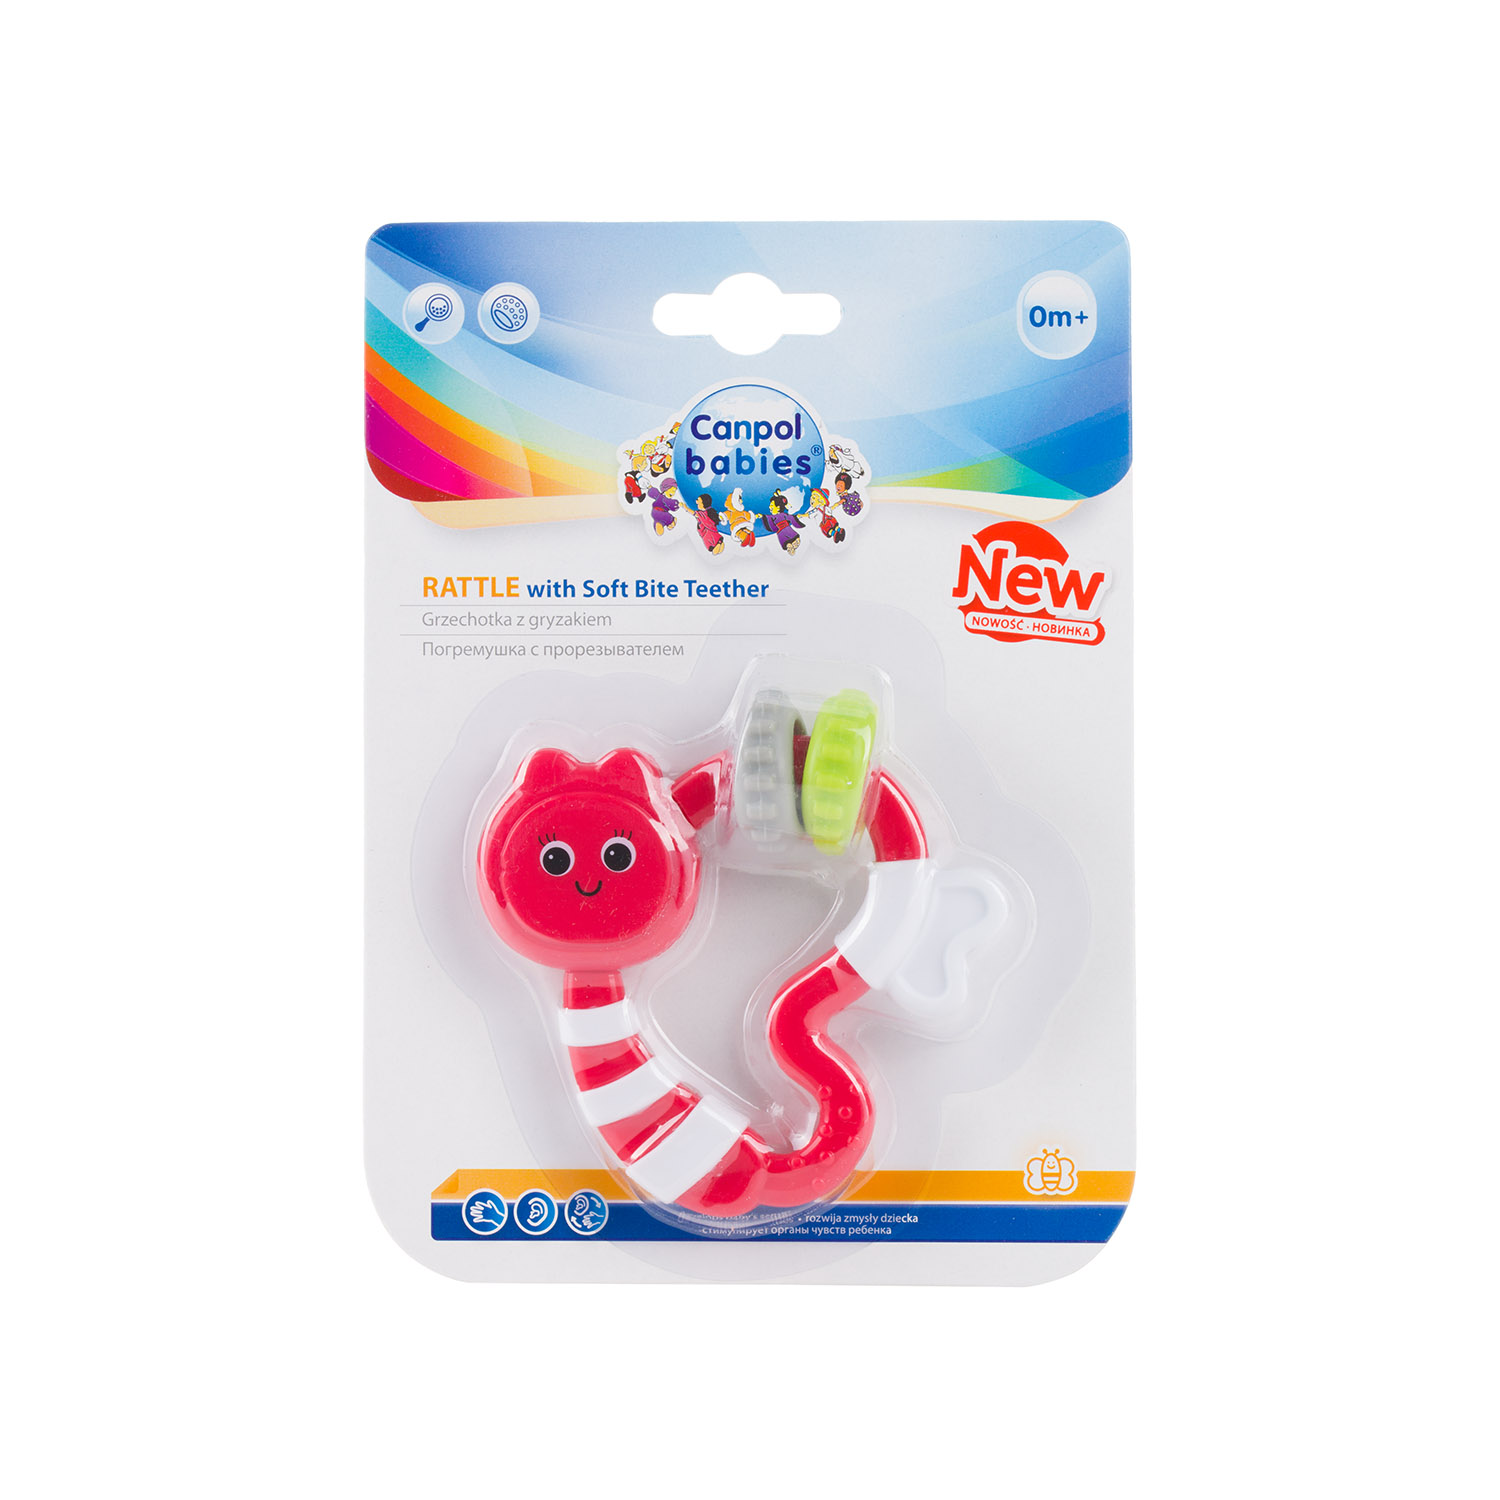 Canpol babies Rattle with Teether